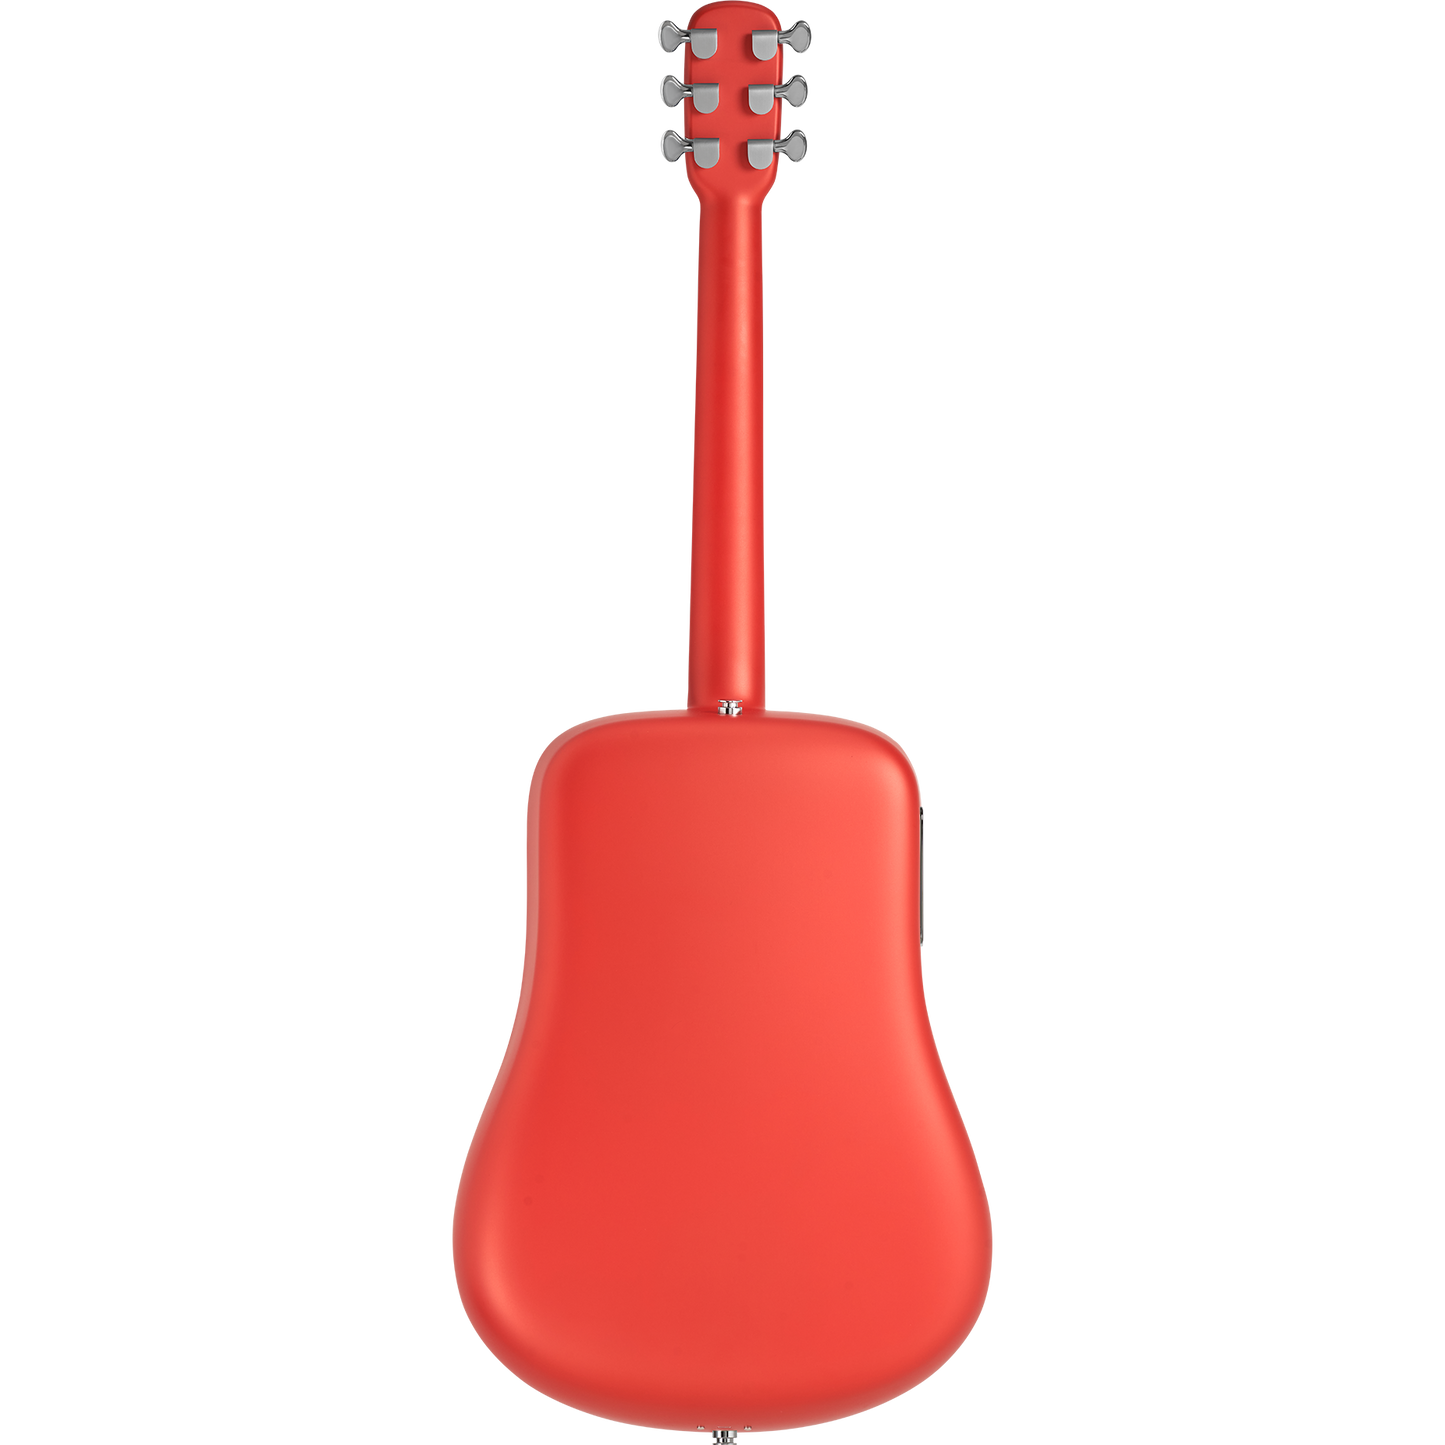 Lava Music Lava ME 3 38” Smart Guitar in Red w/ Space Bag